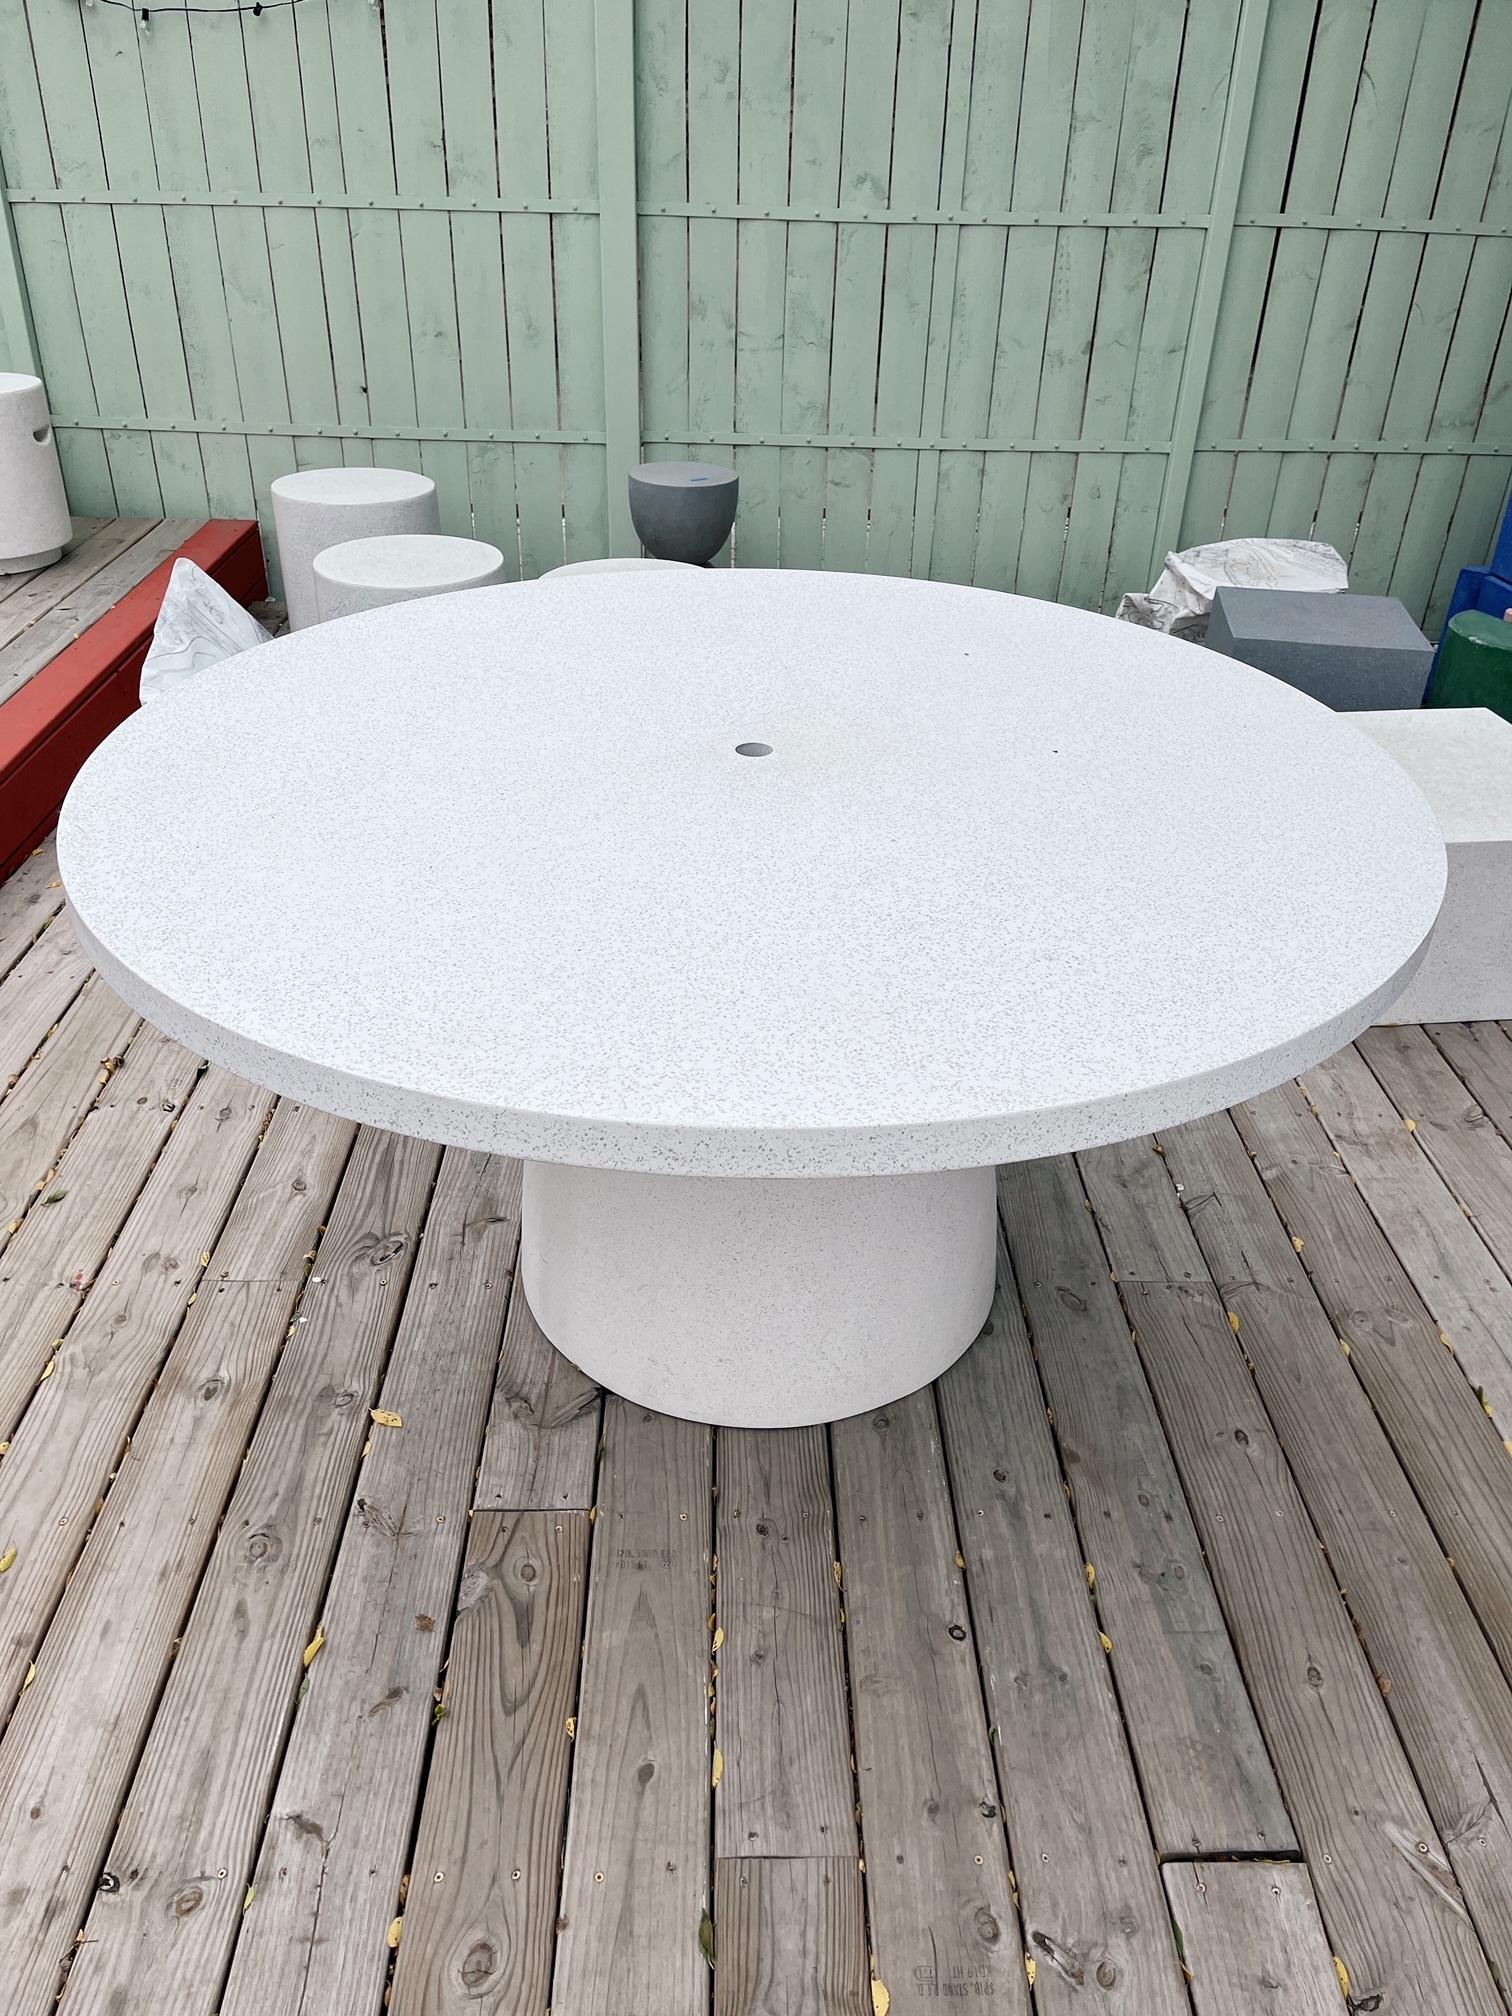 Minimalist Cast Resin 'Hive' Dining Table, White Stone Finish by Zachary A. Design For Sale